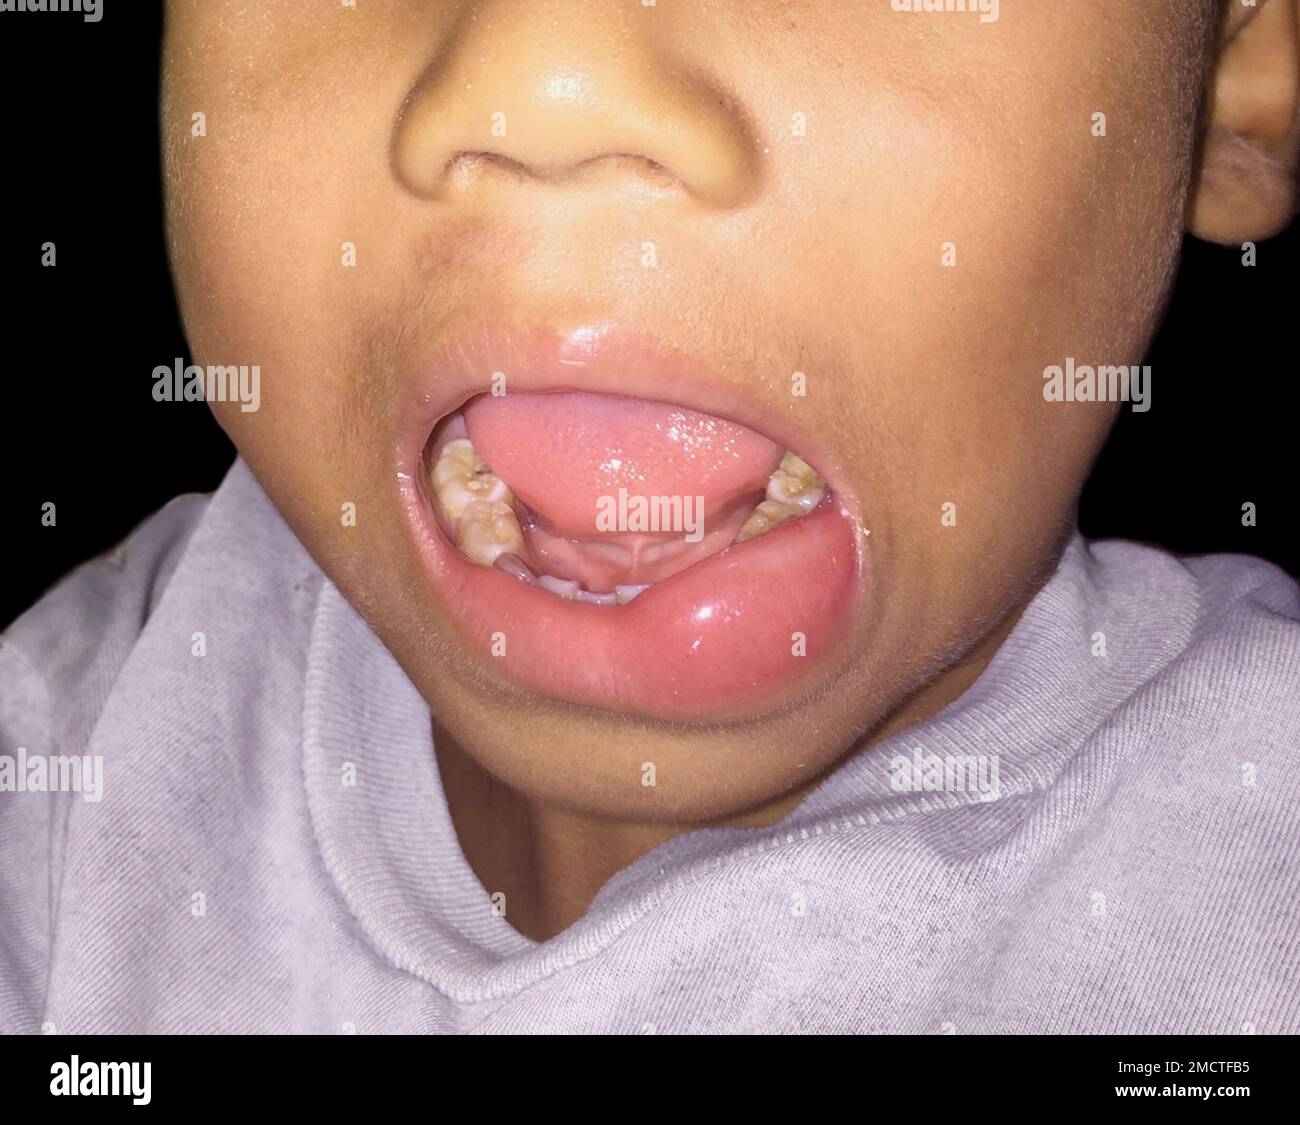 Angioedema at the lower lip of Asian male child. Caused by drug, seafood or chemical allergy and insect bite. Stock Photo